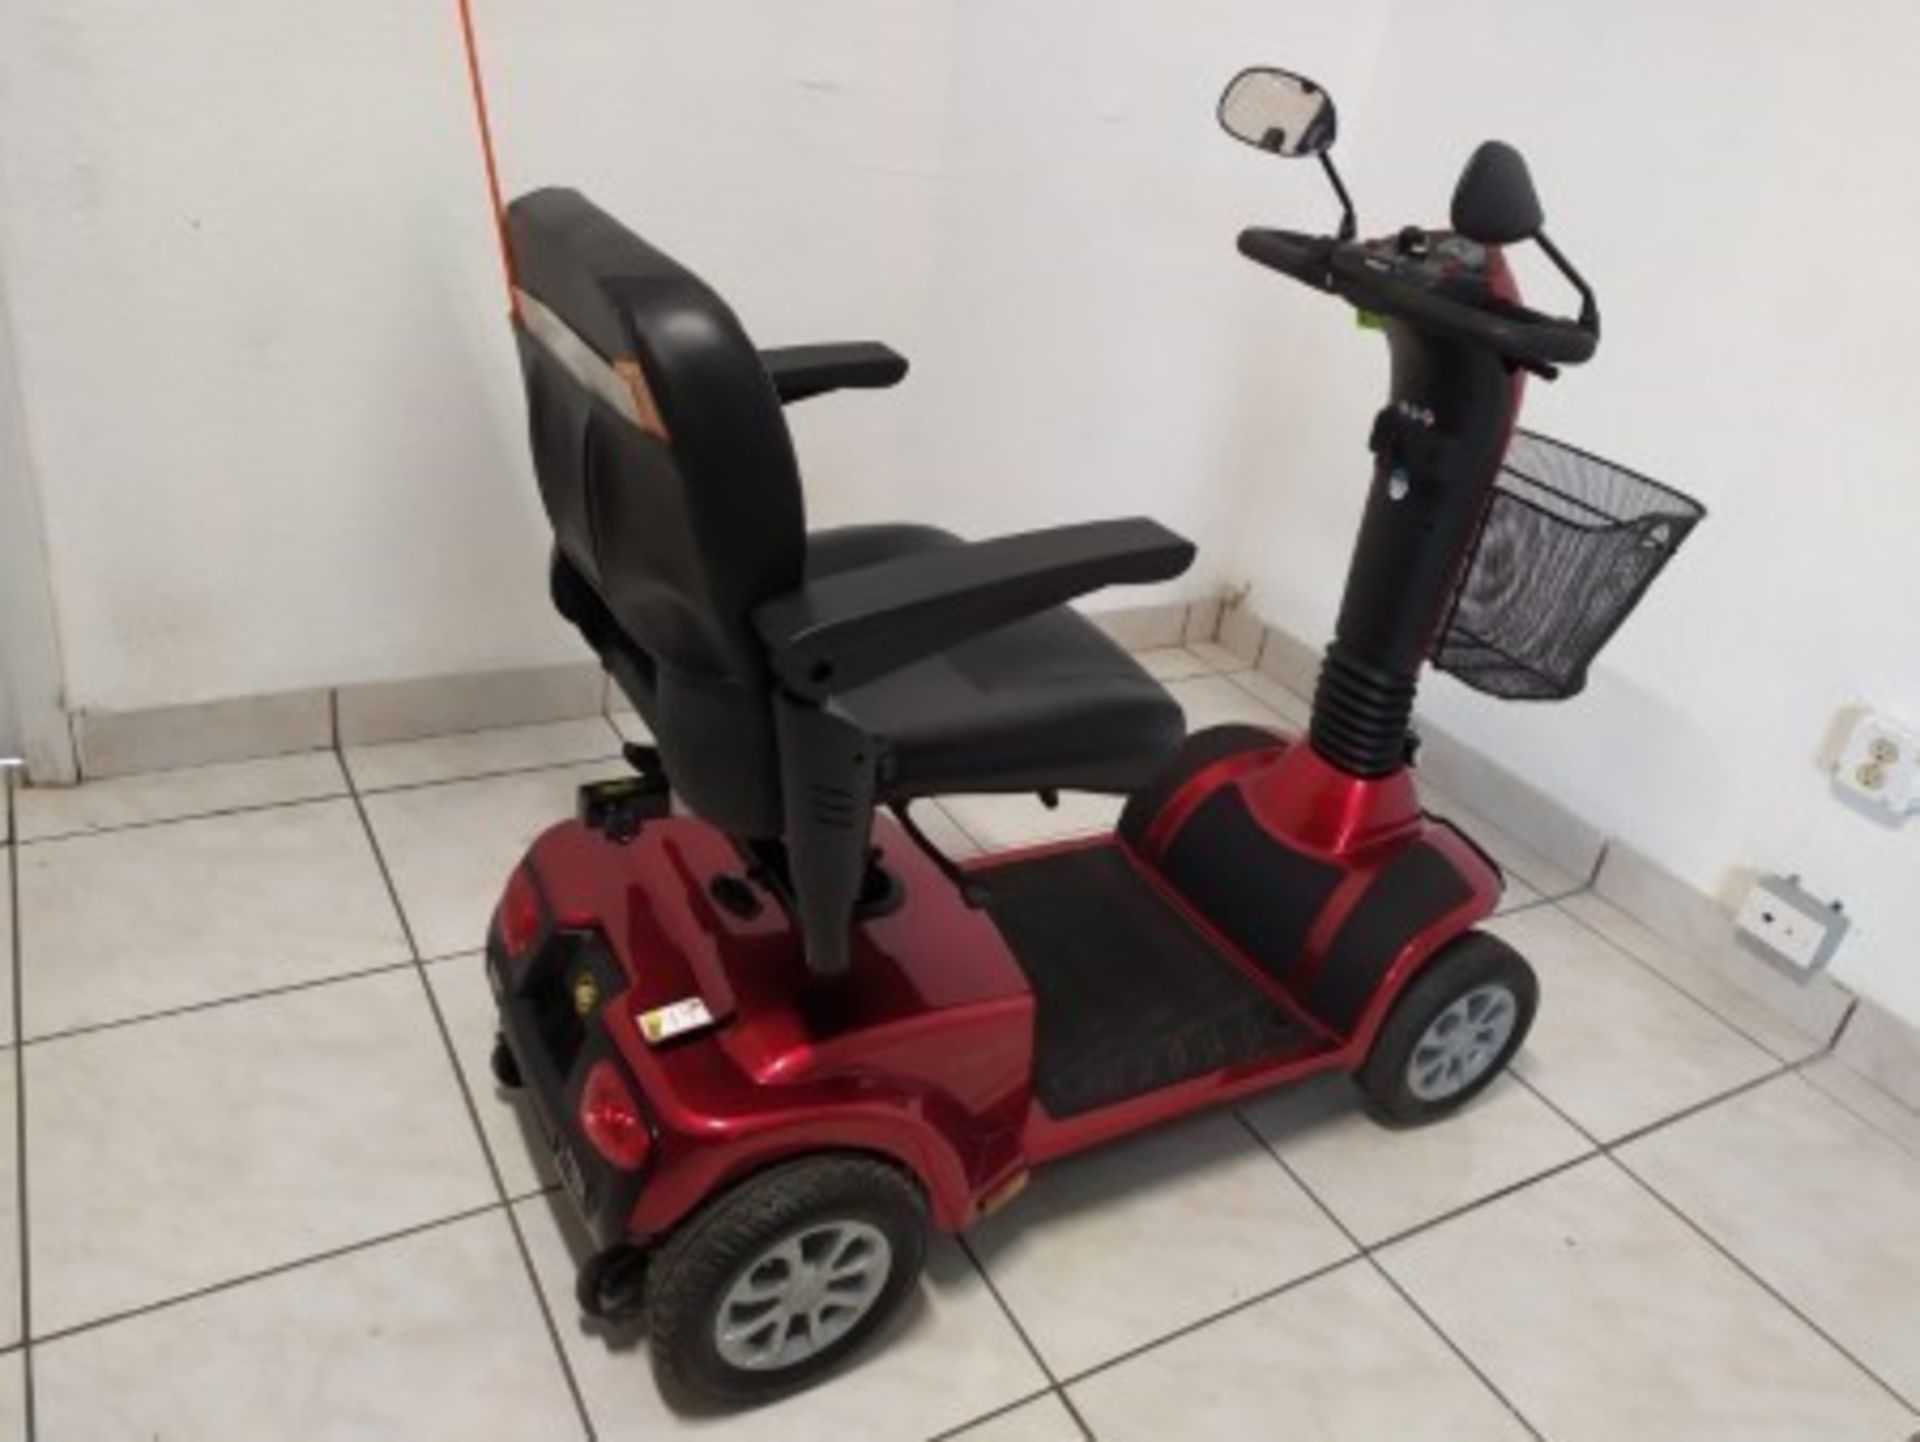 2017 GOLDEN COMPANION GC440 4-WHEEL SCOOTER WITH CHARGER, BASKET & COVER - RED - 400LB CAPACITY - SE - Image 5 of 6